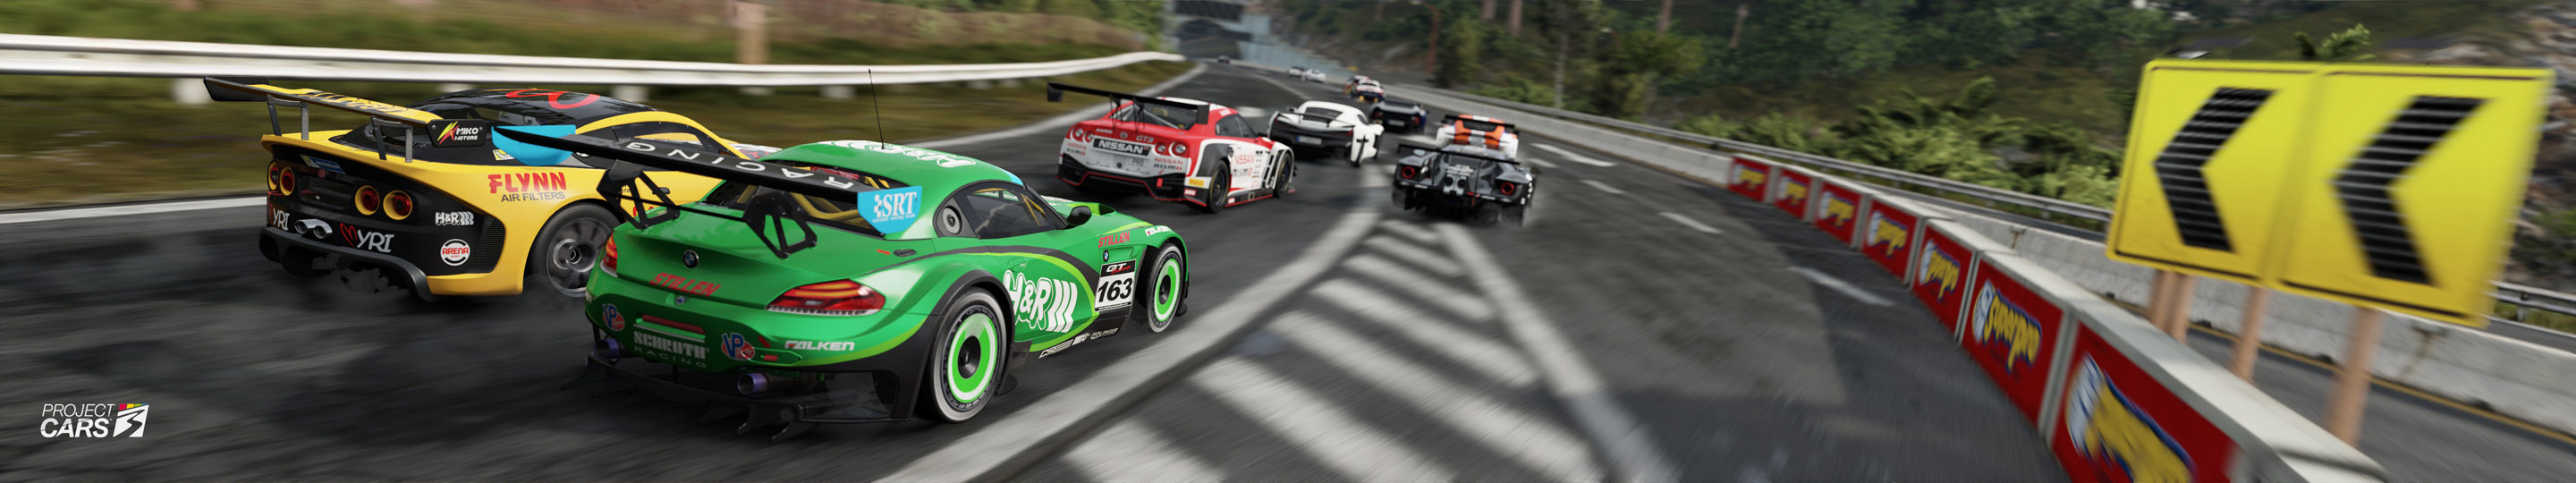 2 PROJECT CARS 3 BMW Z4 GT3 at CALI HIGHWAY REVERSE copy.jpg